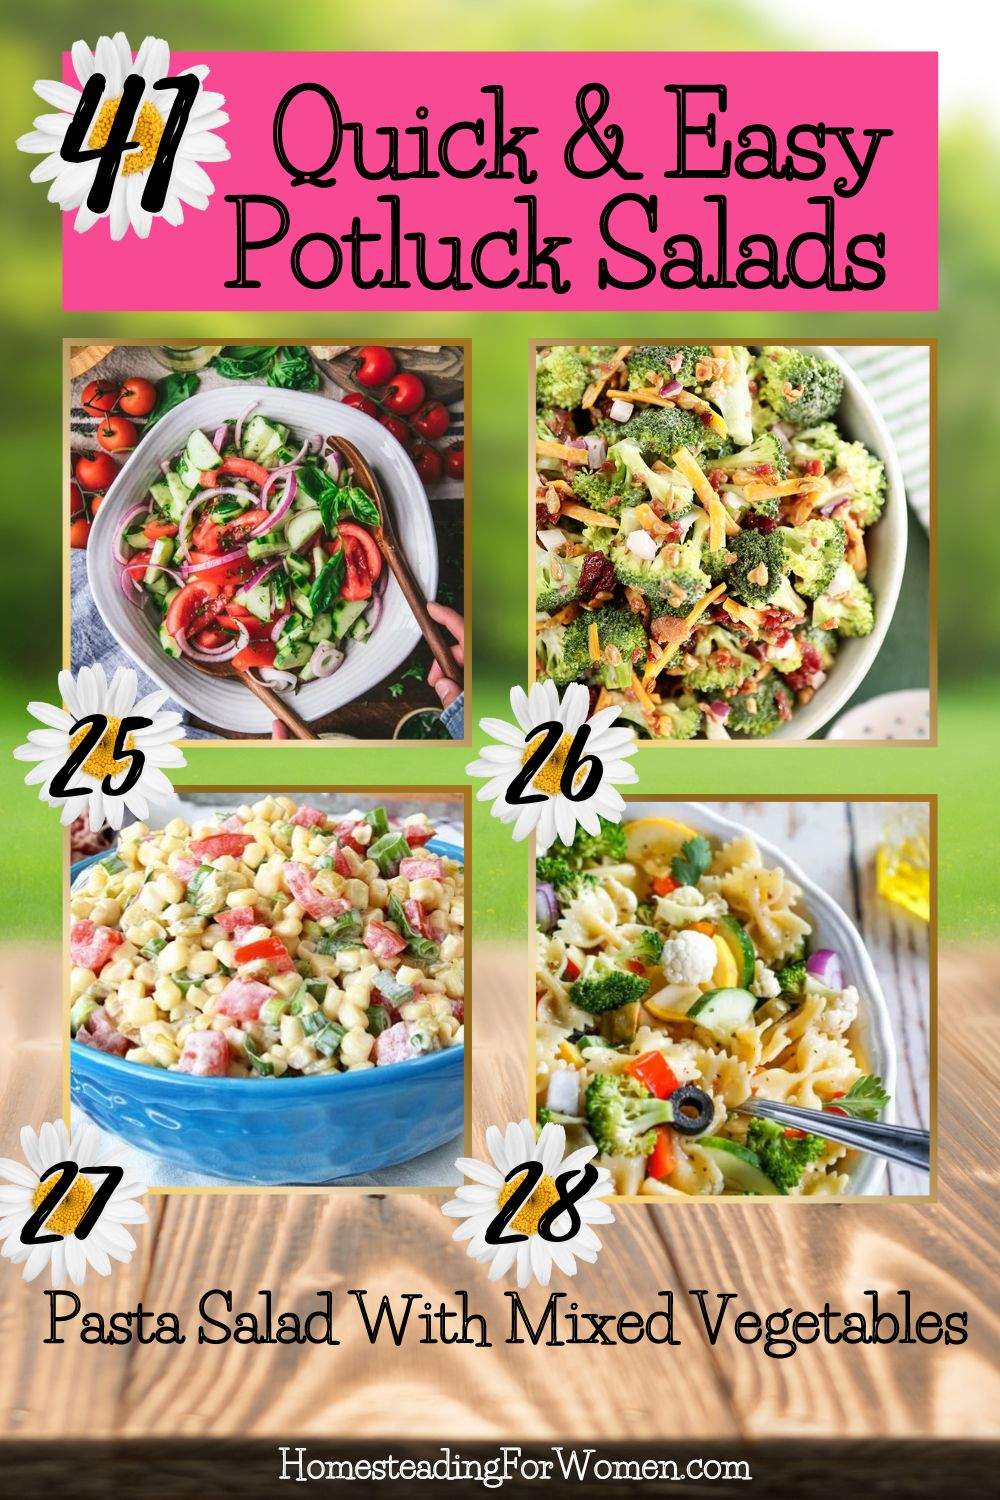 41 QUICK AND EASY POTLUCK SALADS - Homesteading for women